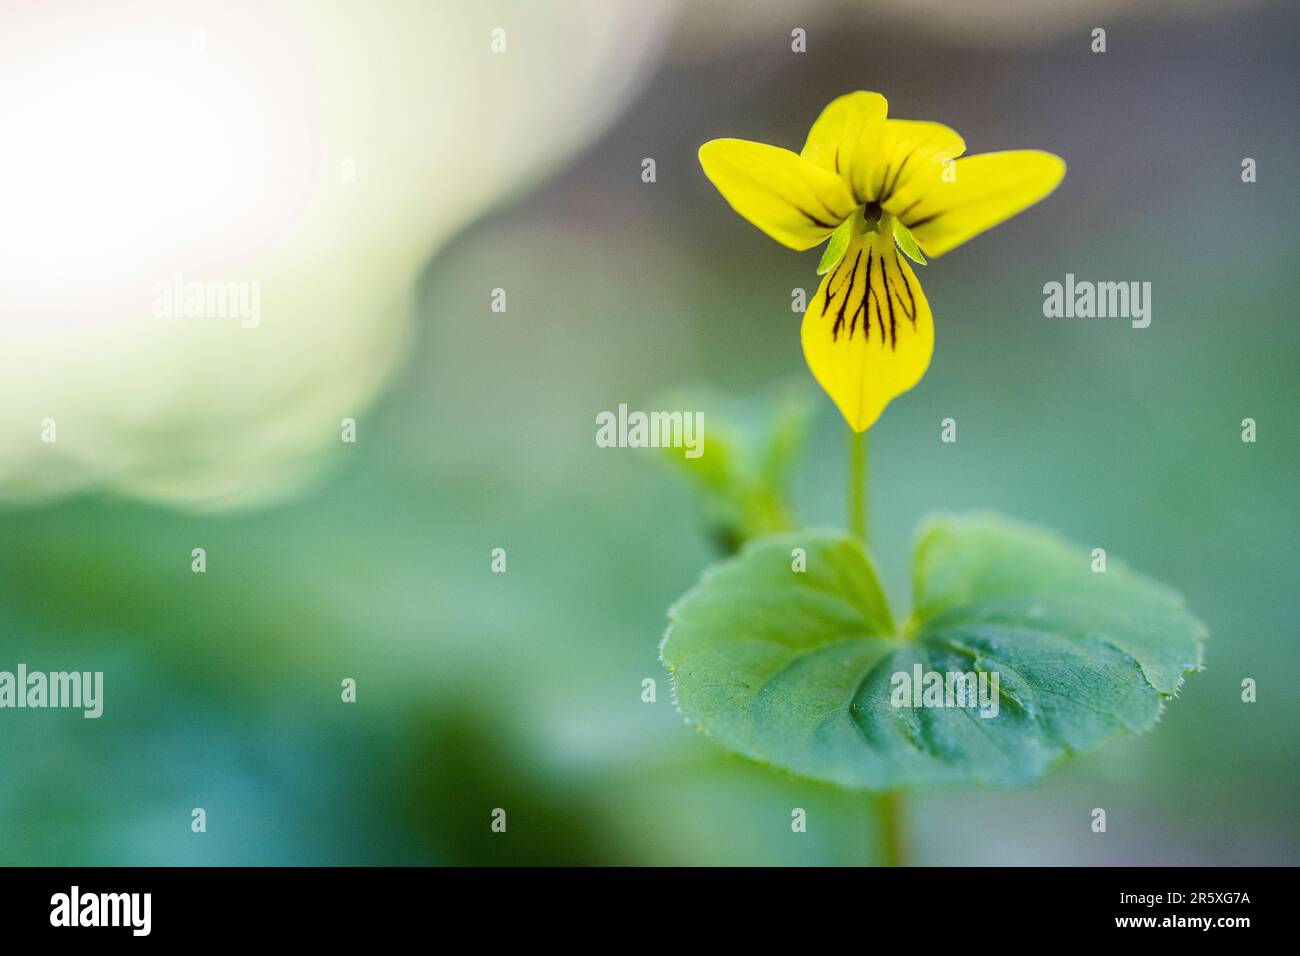 Viola biflora is a species of the genus Viola. It is also called alpine yellow-violet, arctic yellow violet, or twoflower violet. Stock Photo